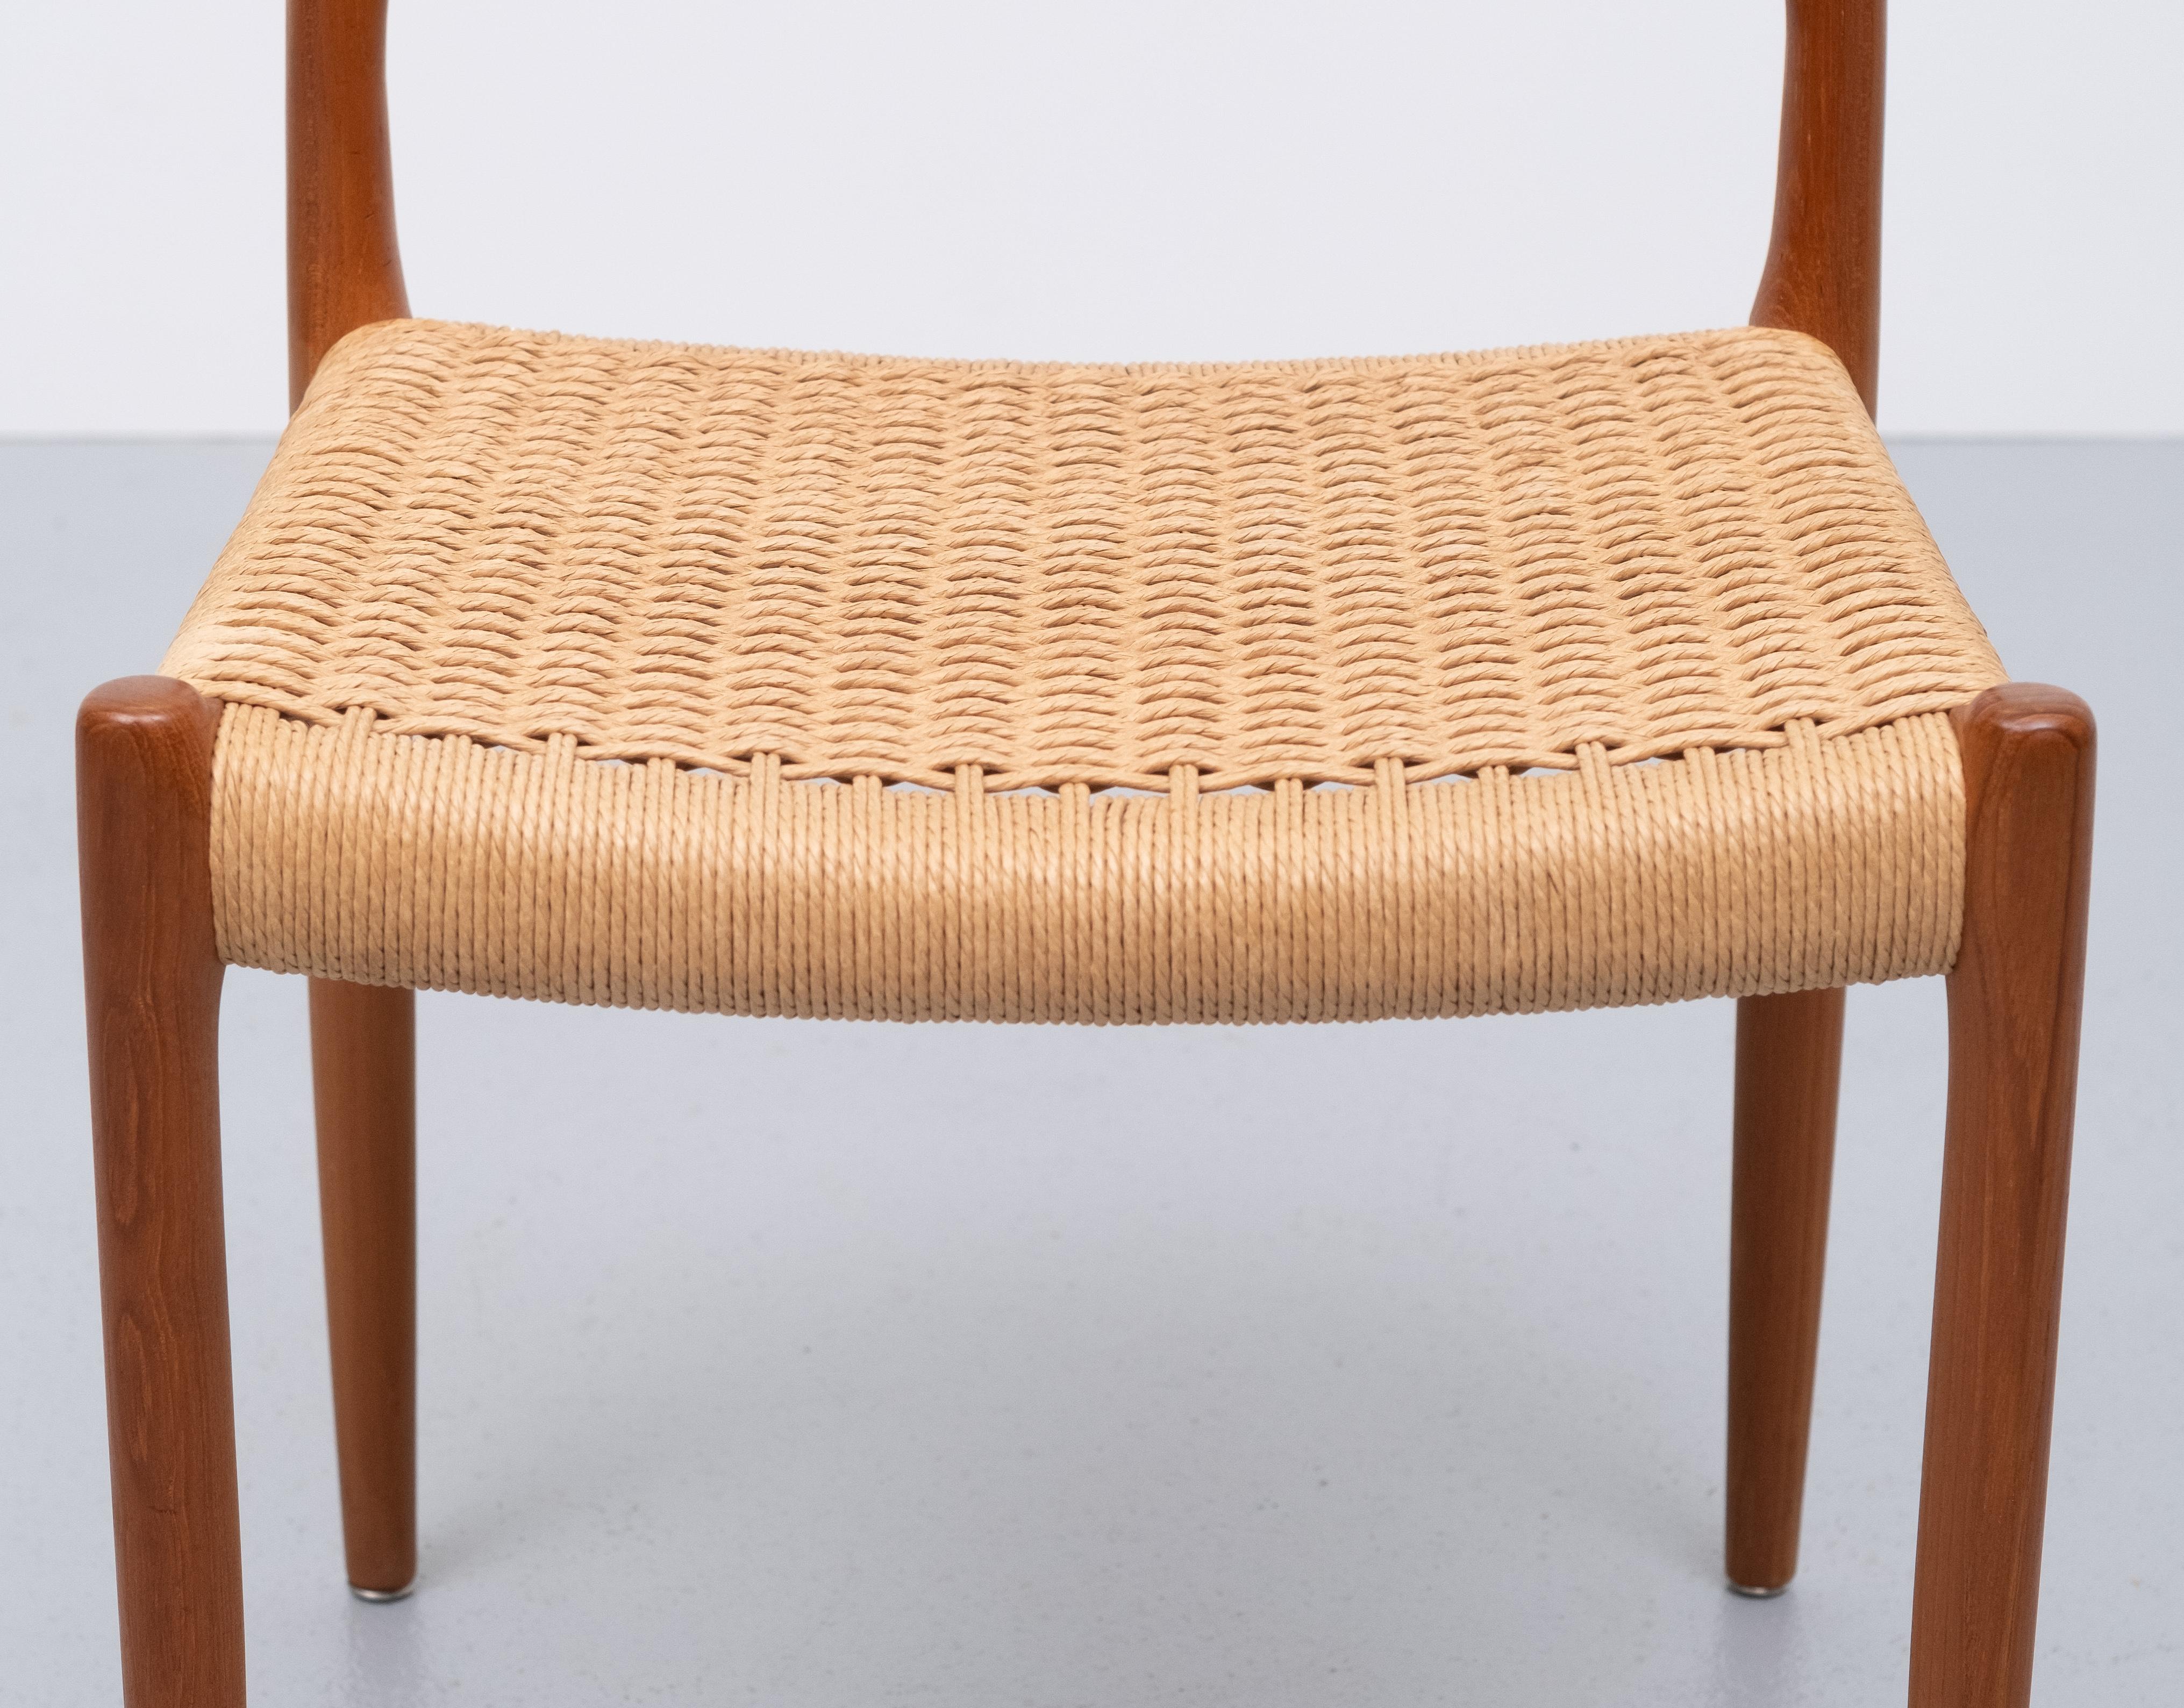 Beautiful original Danish vintage design dining room chairs by Niels O. Møller for J.L. Moller Mobelfabrik. Period: 1960s. Model number 83. Particularly organically designed backrest. The beautiful finish and curved backrest with bars offers good